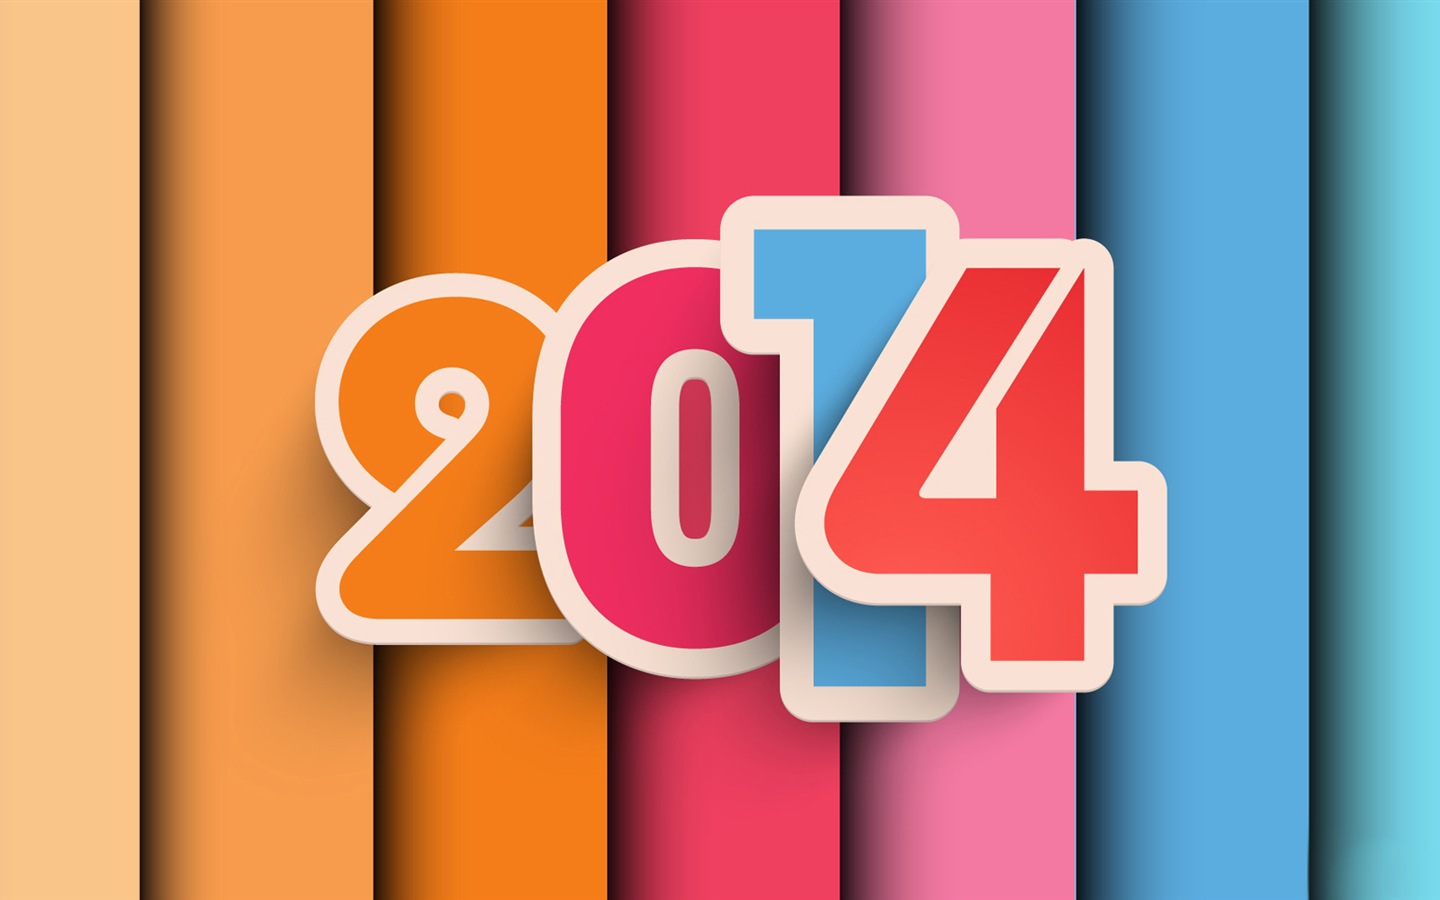 2014 New Year Theme HD Wallpapers (1) #9 - 1440x900